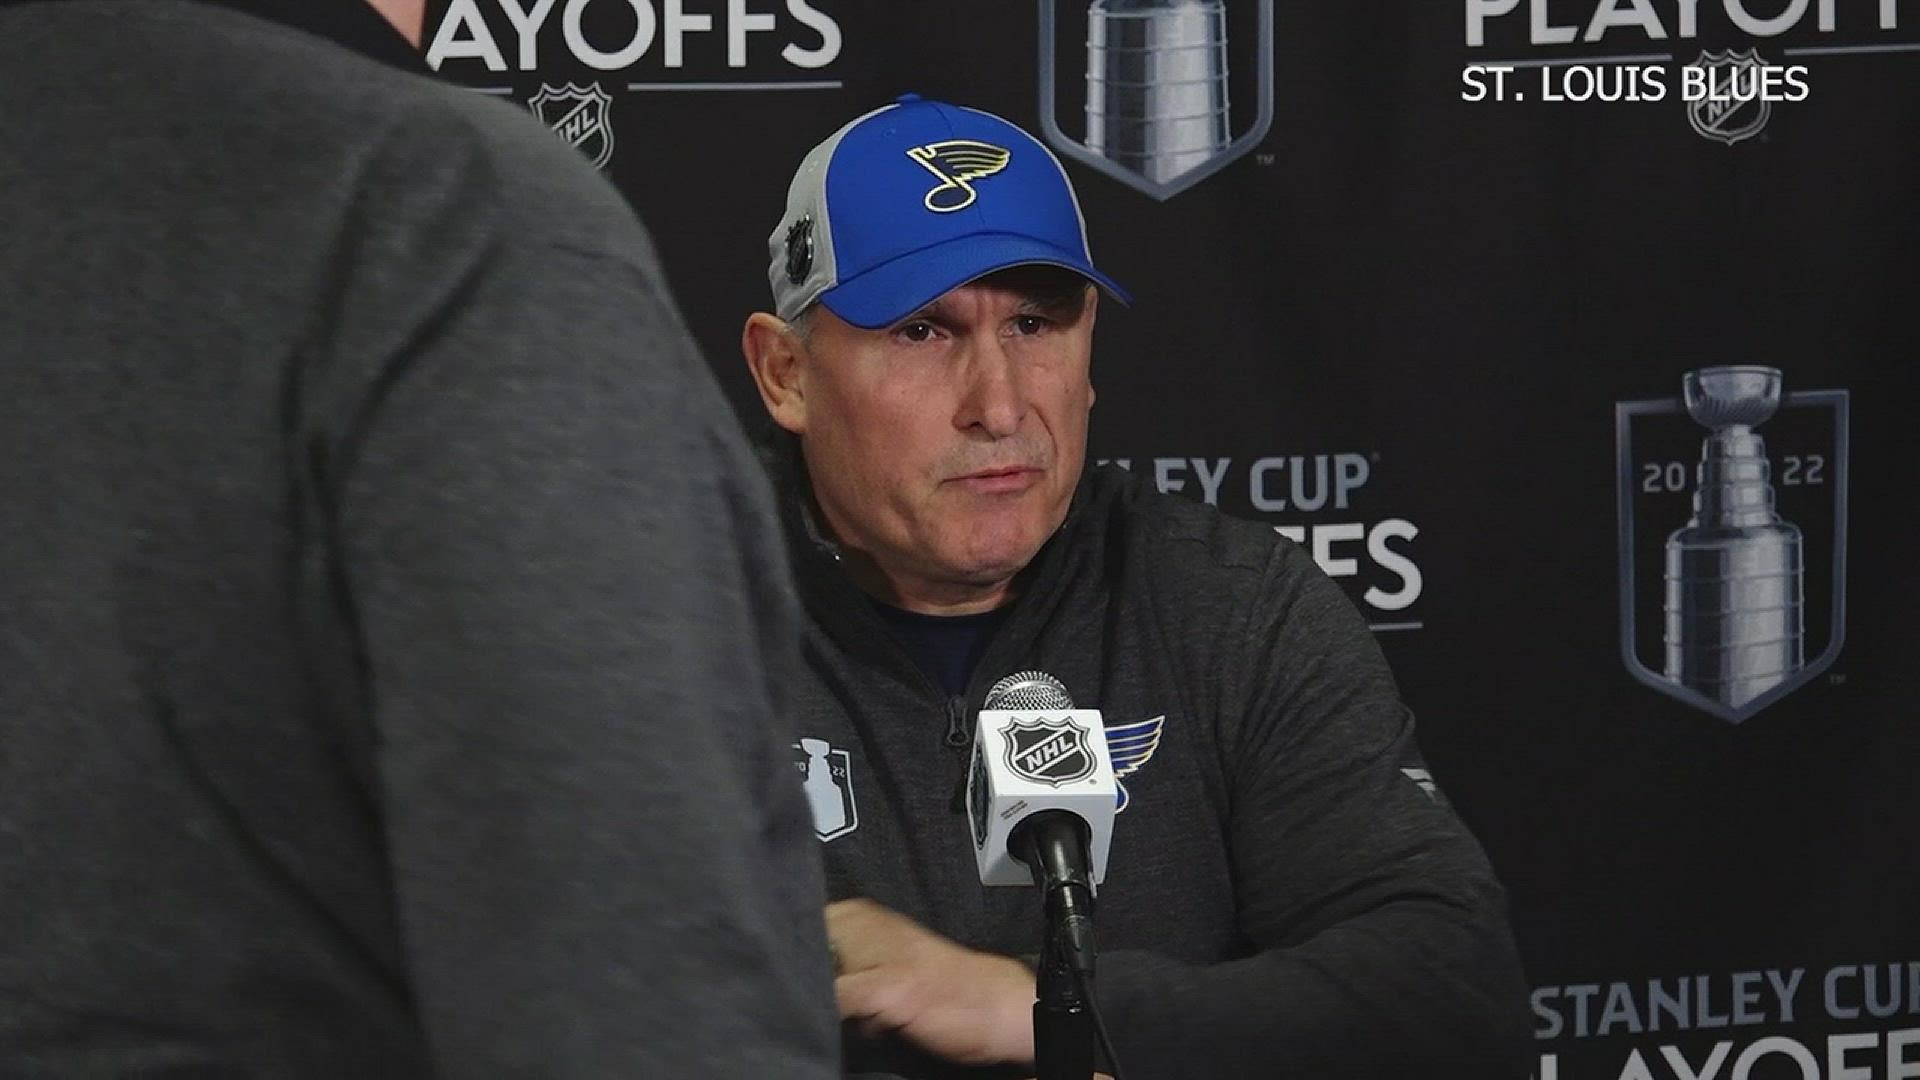 Berube made a statement on the online threats against Colorado forward Nazem Kadri before his press conference ahead of the Blues' Game 5 against the Avalanche. Here